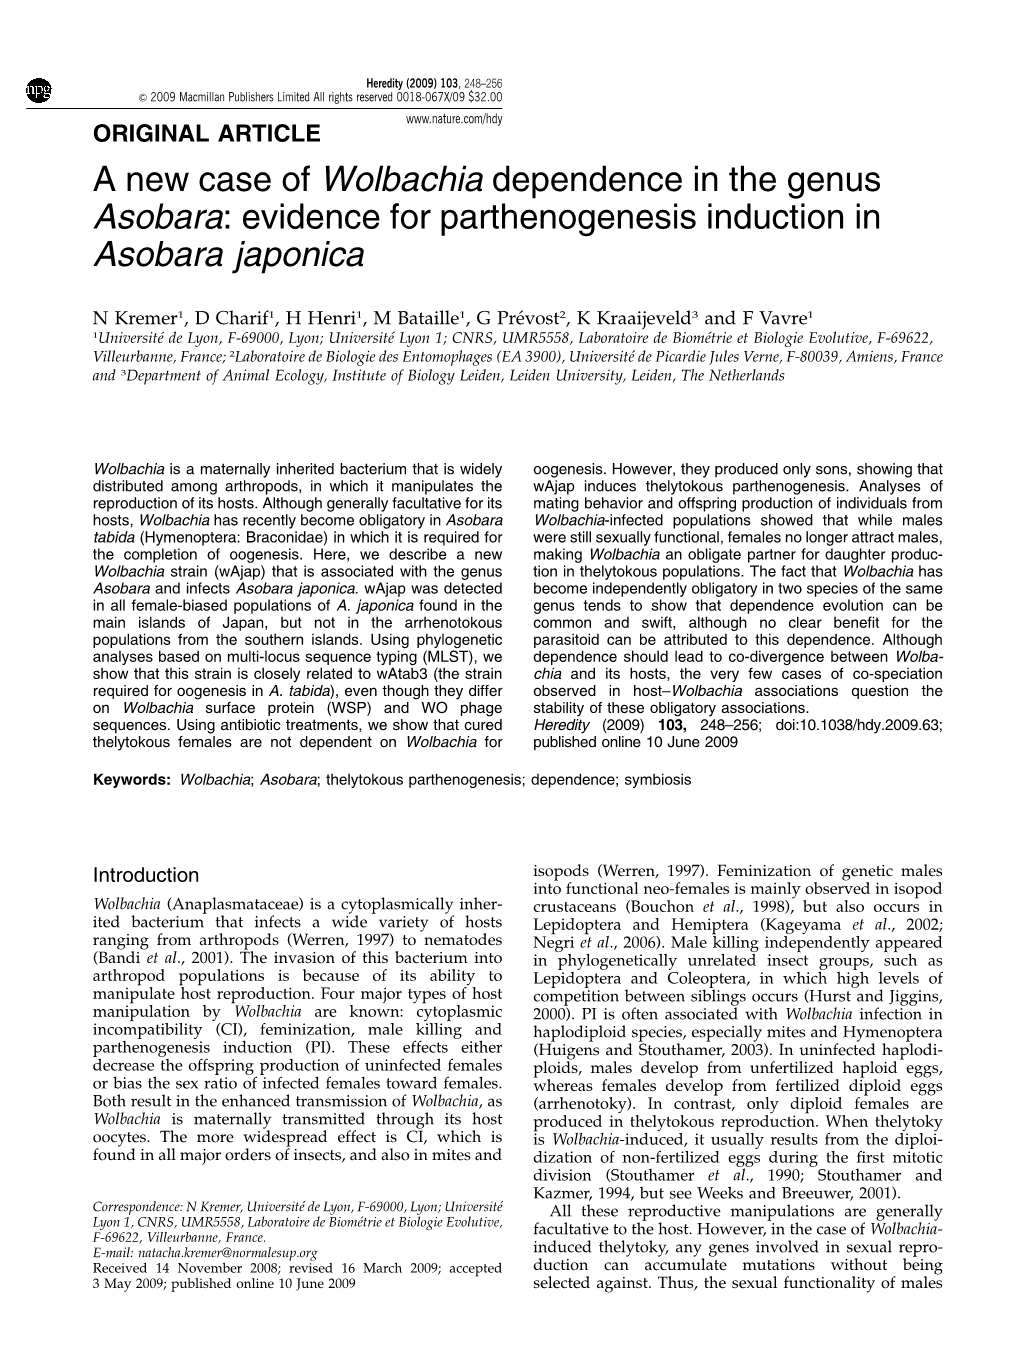 Evidence for Parthenogenesis Induction in Asobara Japonica